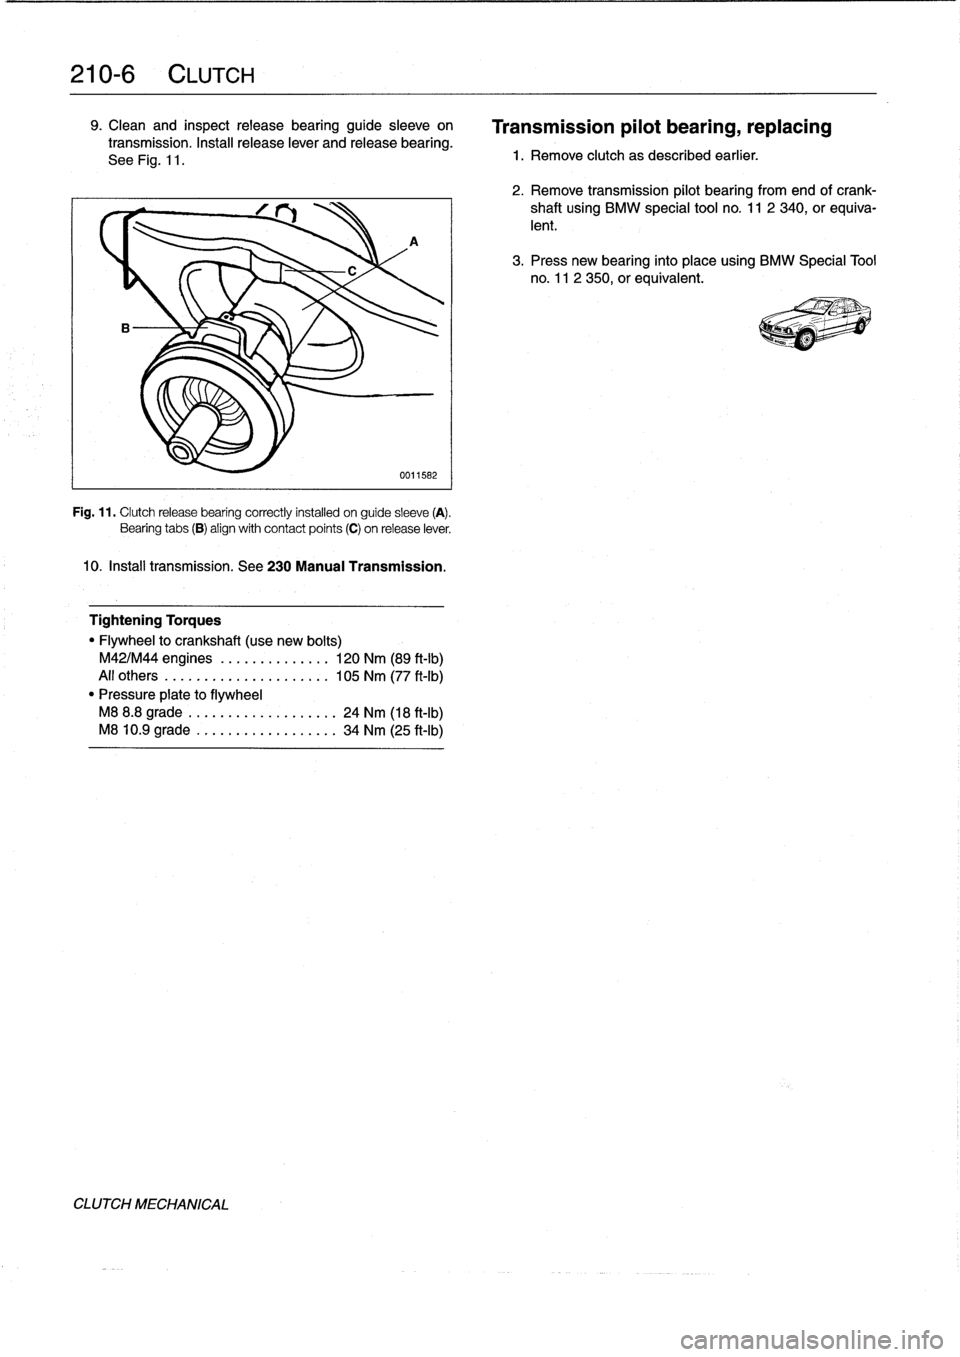 BMW 323i 1998 E36 User Guide 
210-
6
CLUTCH

9
.
Clean
and
inspectrelease
bearing
guide
sleeve
on

transmission
.
Install
release
lever
and
release
bearing
.

See
Fig
.
11
.

A

0011582

Fig
.
11
.
Clutchrelease
bearing
correctly